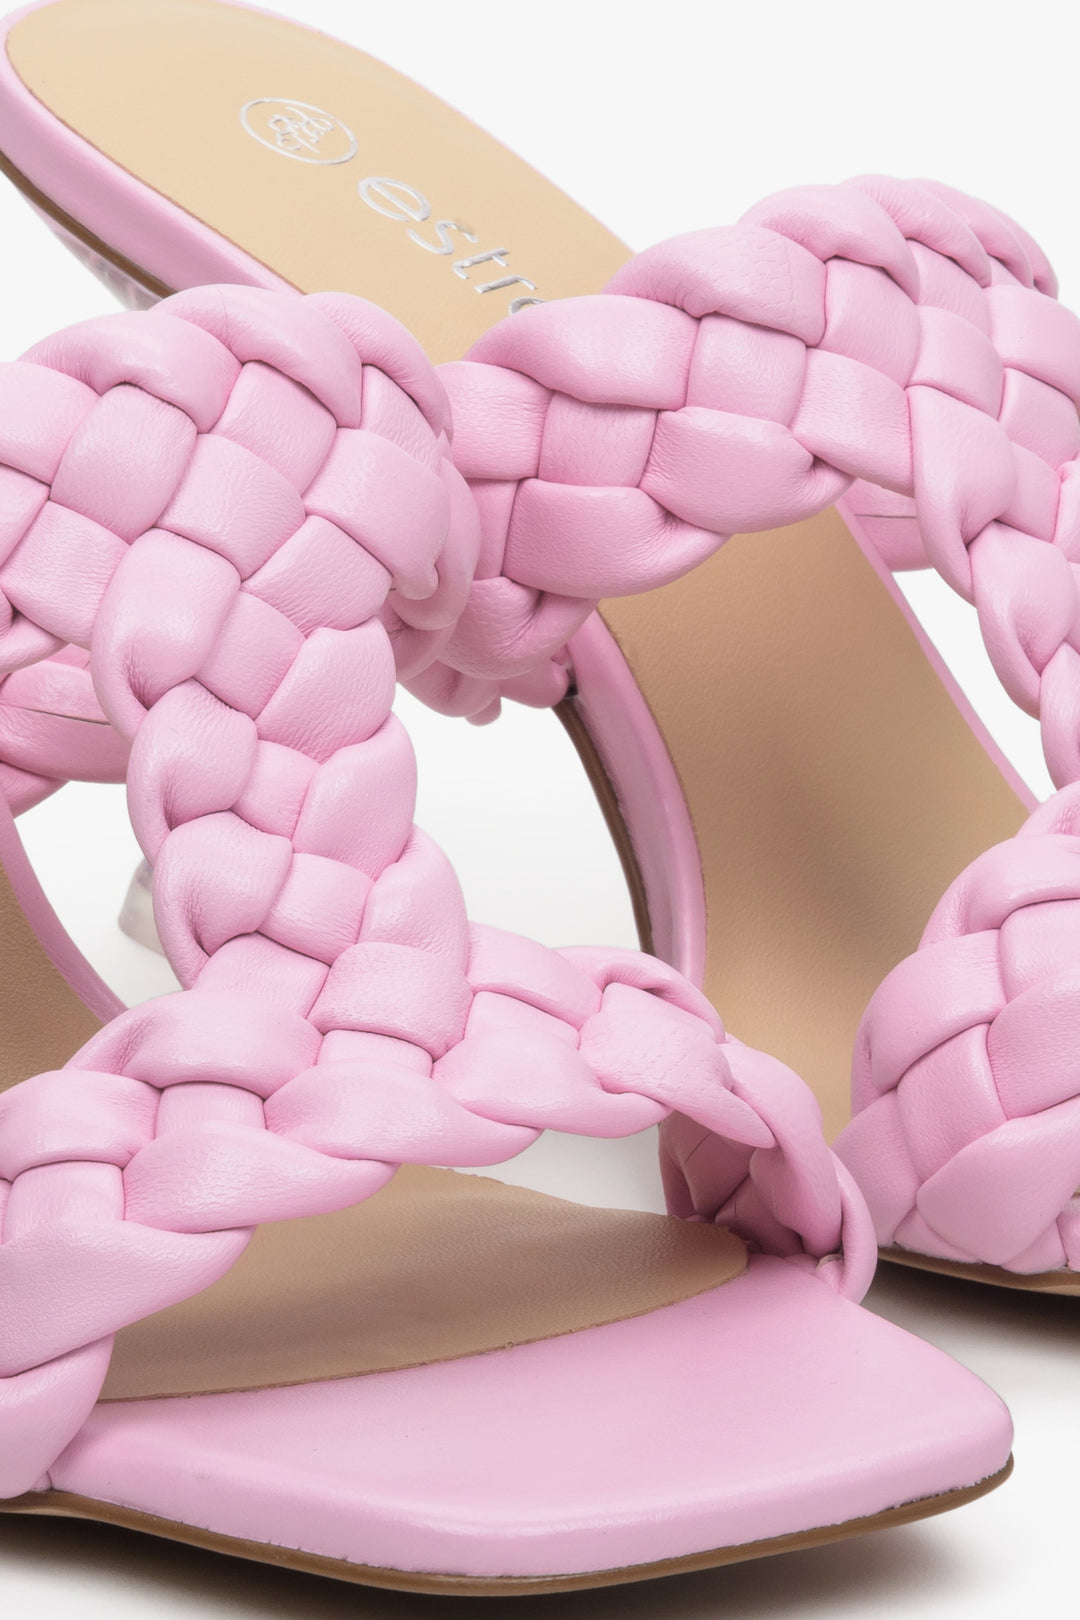 Women's pink leather heeled sandals - a close-up on details.